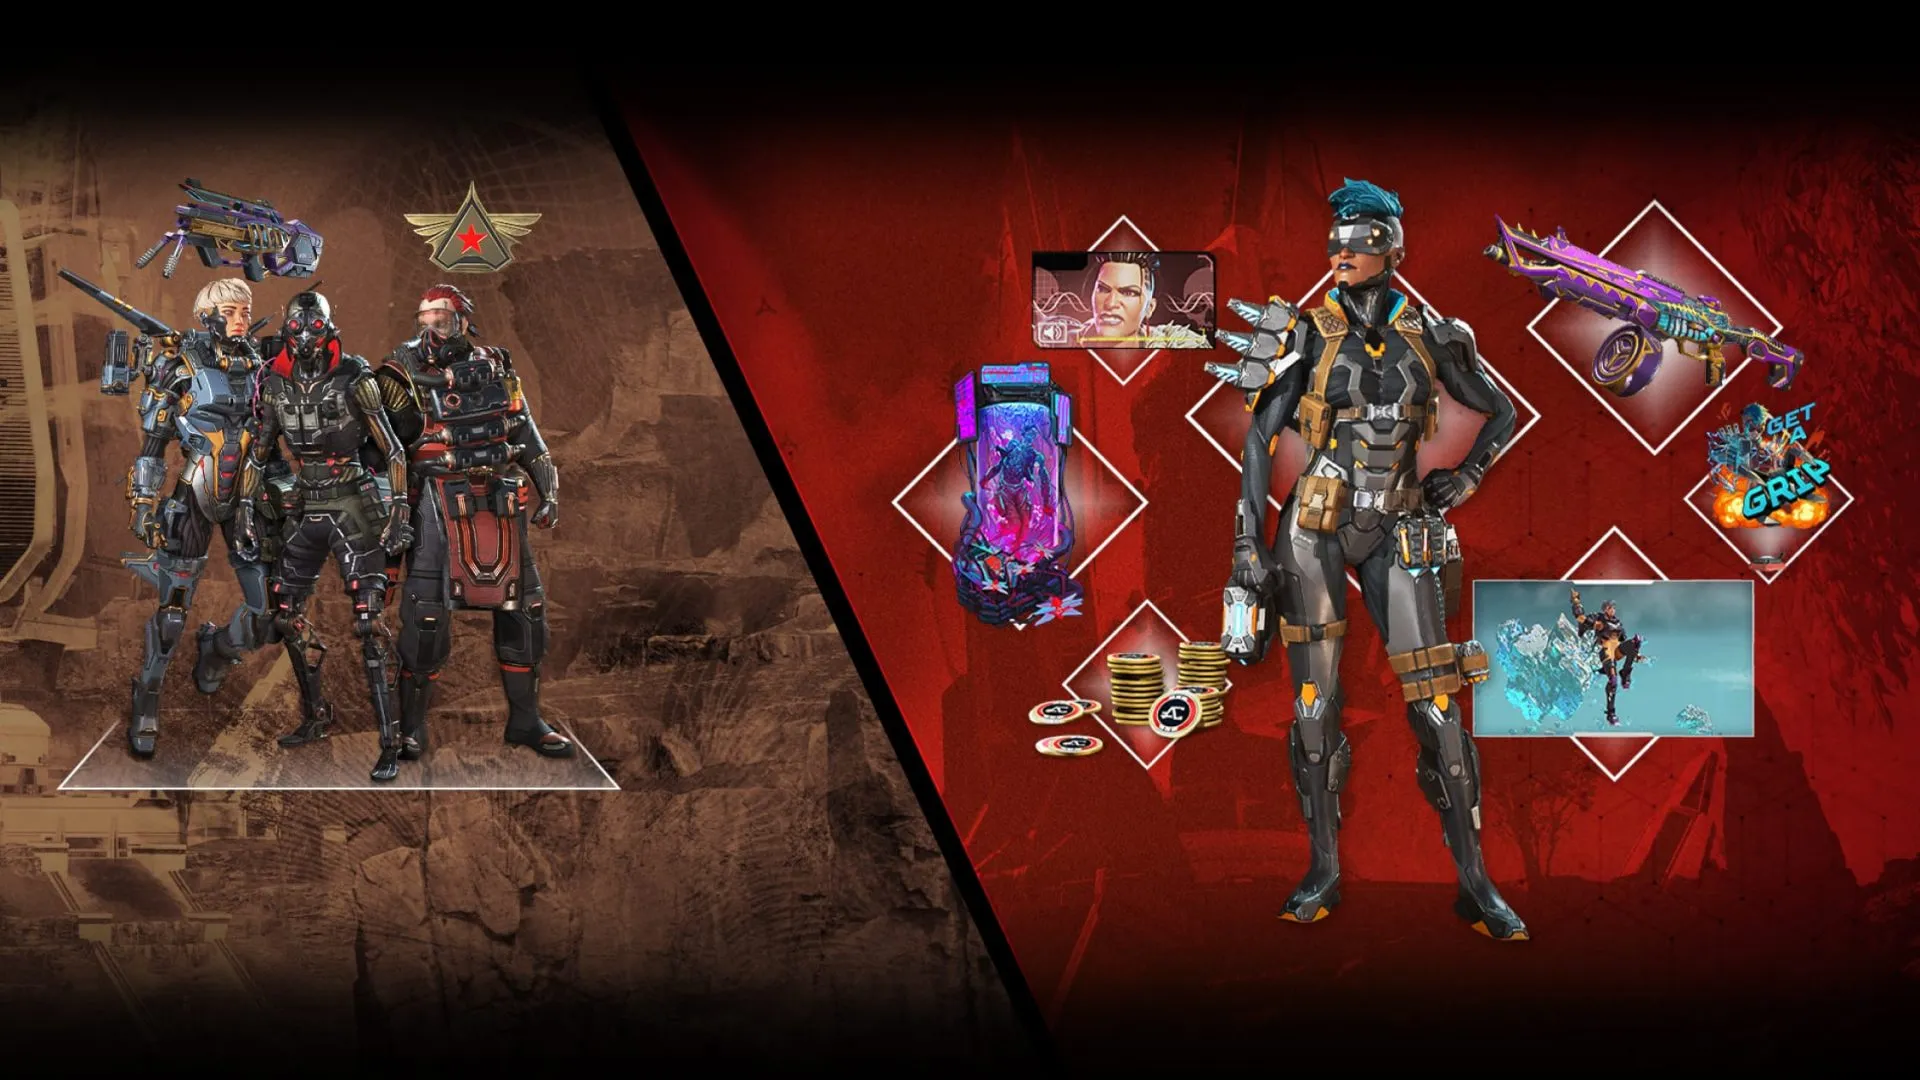 Apex Legends cross-progression could come soon, according to data